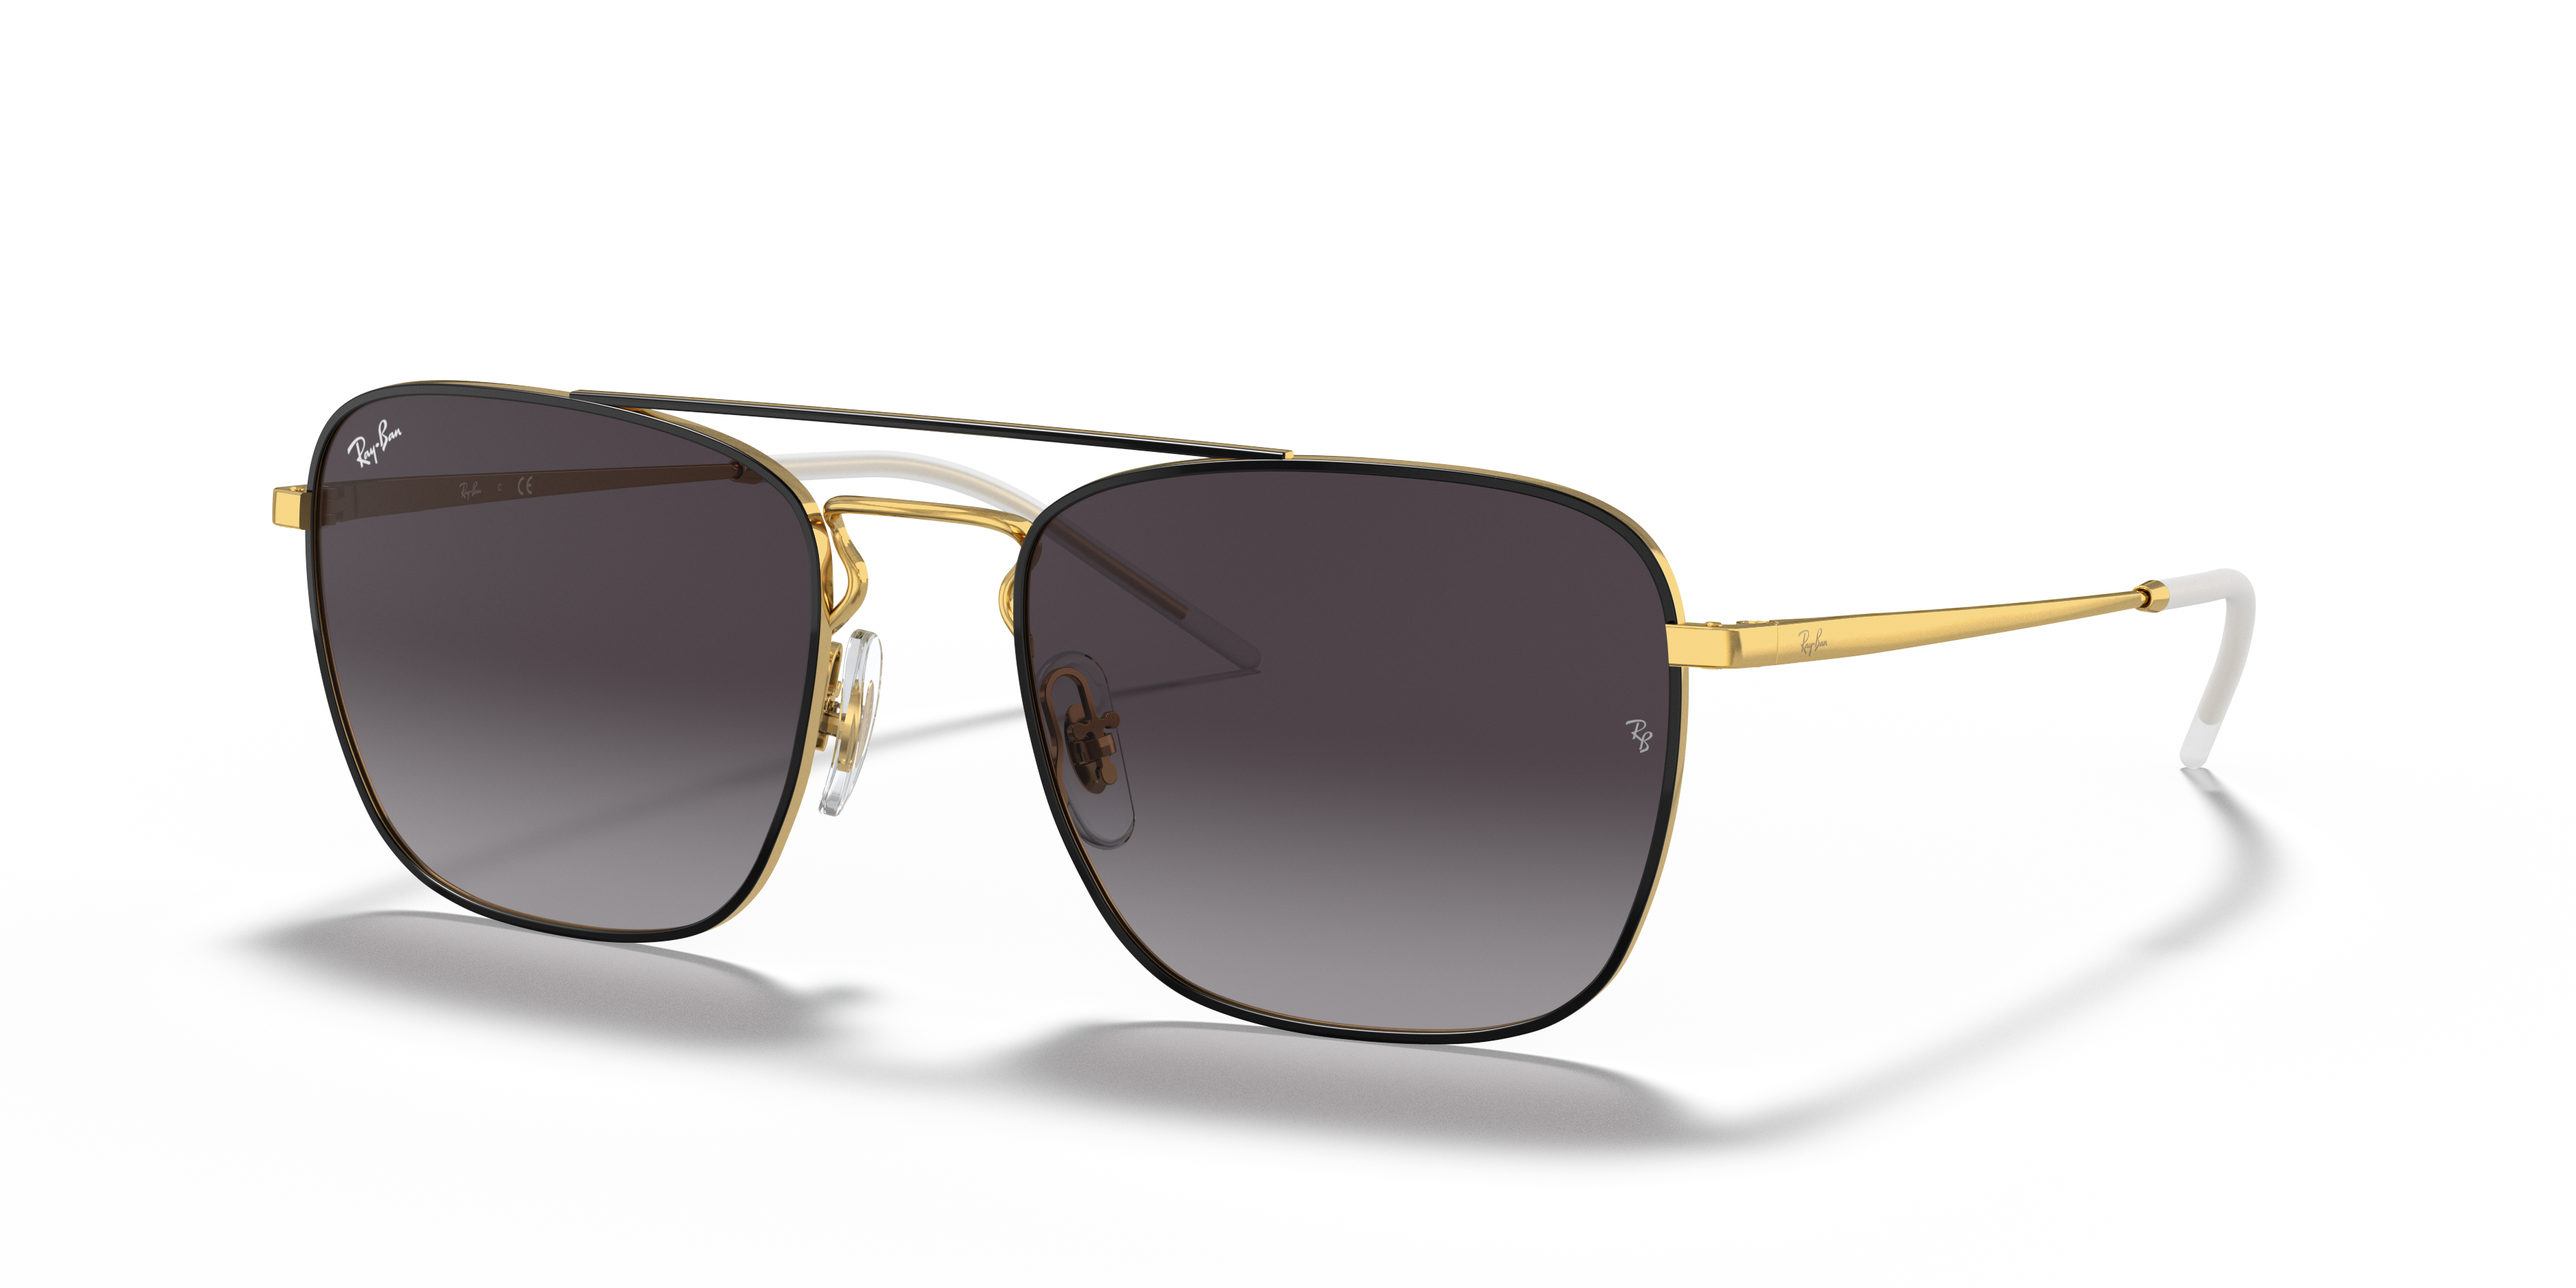 RB3588 Sunglasses in Black On Gold and Grey - RB3588 | Ray-Ban®